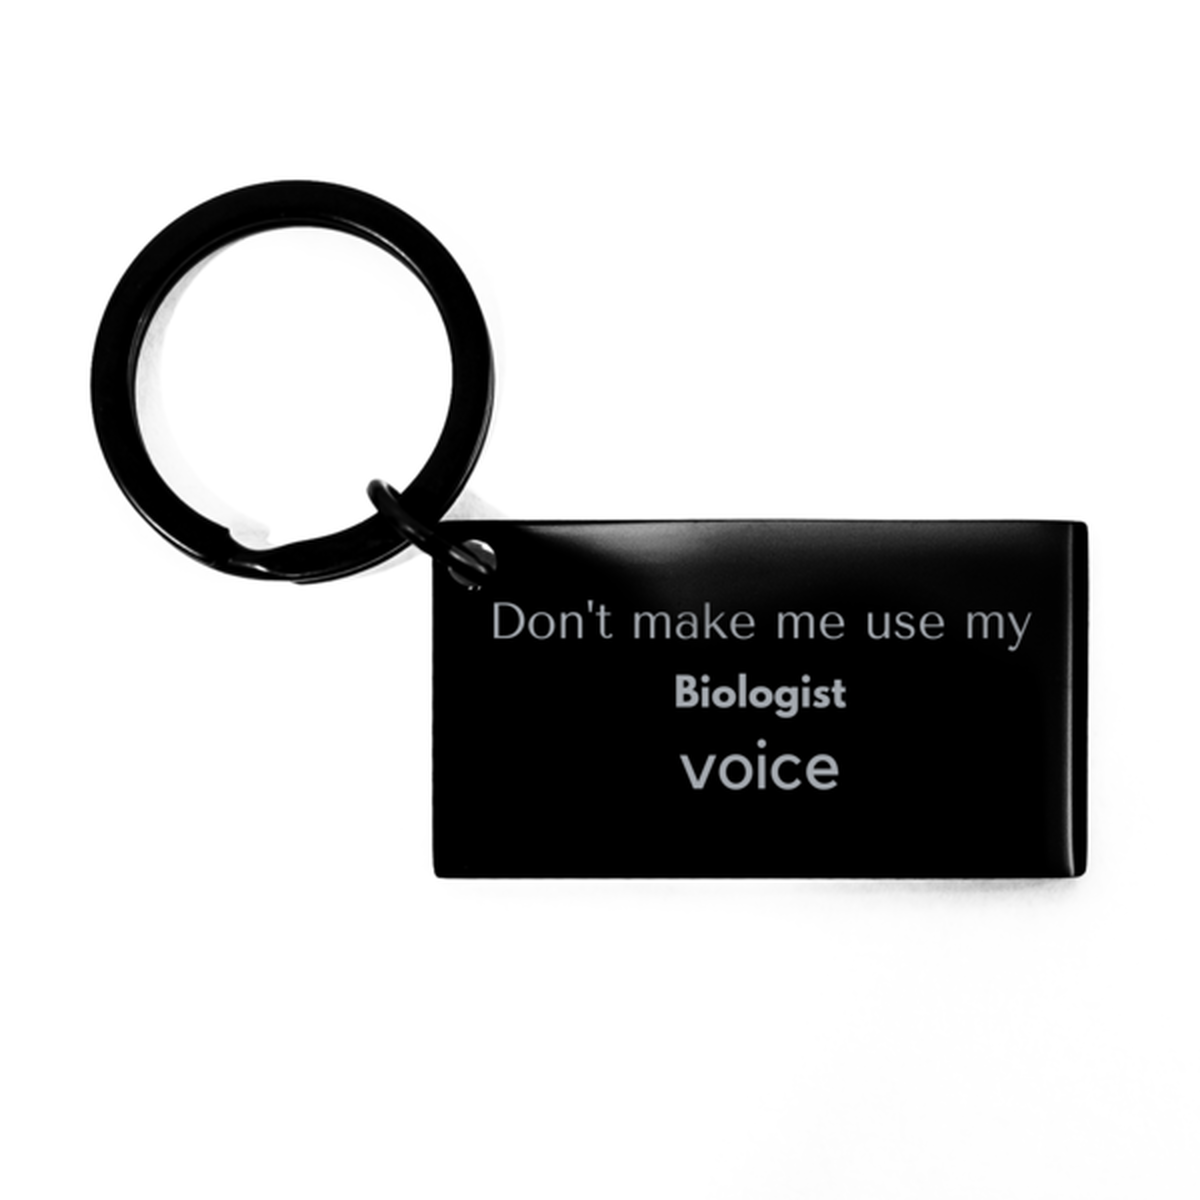 Don't make me use my Biologist voice, Sarcasm Biologist Gifts, Christmas Biologist Keychain Birthday Unique Gifts For Biologist Coworkers, Men, Women, Colleague, Friends